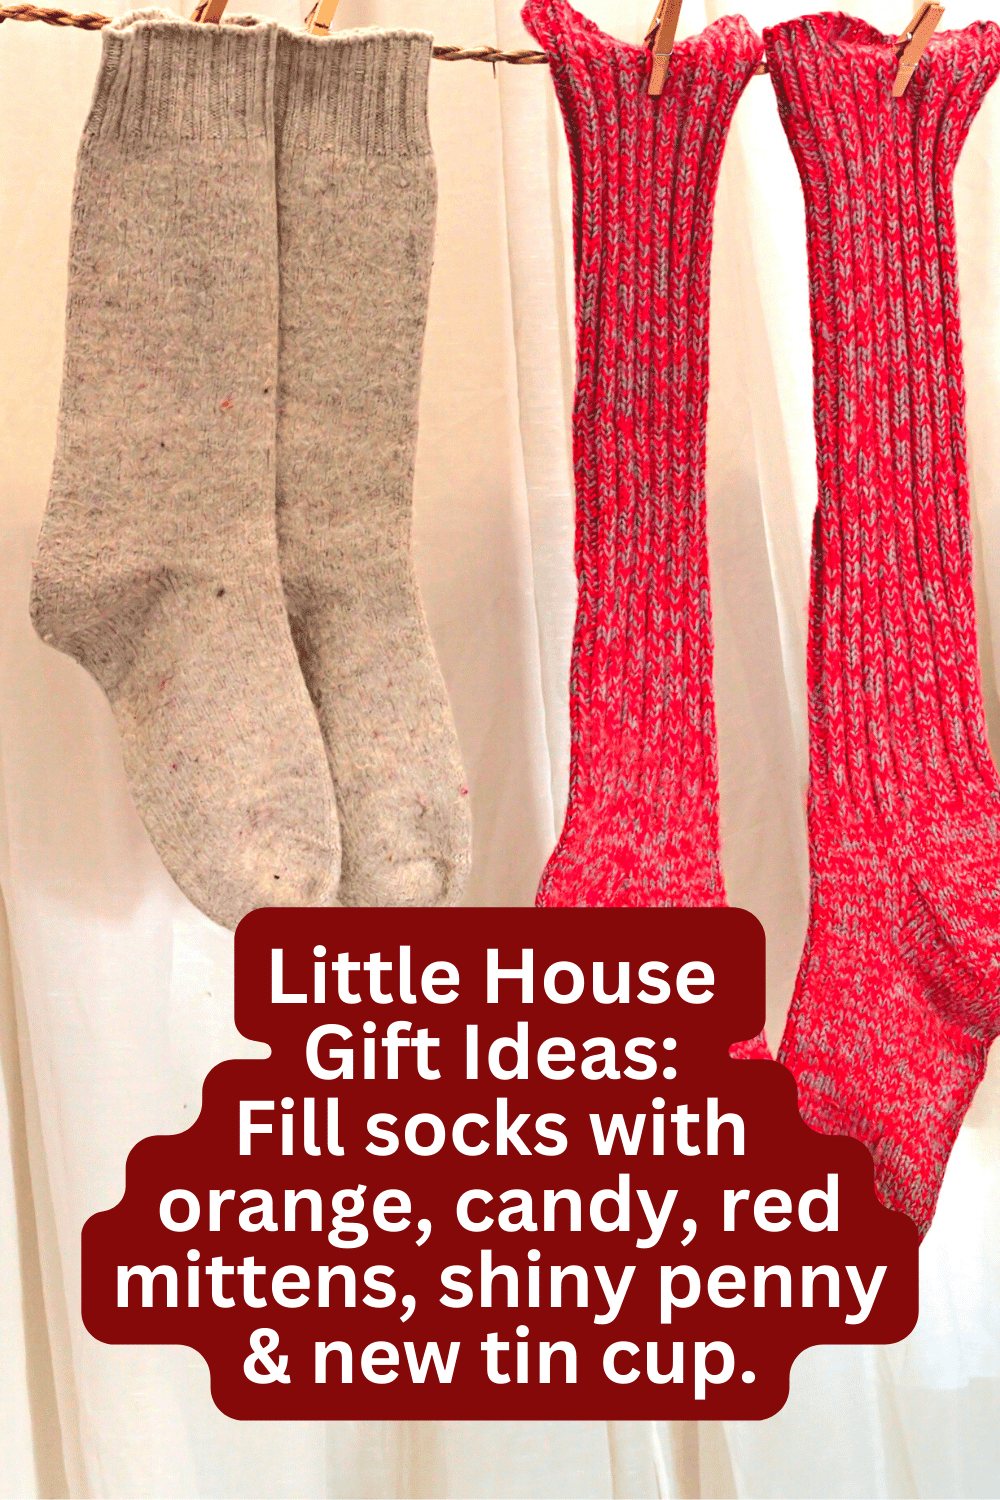 Little House On the Prairie Christmas Gifts in Wool Stockings wool socks hanging from twine